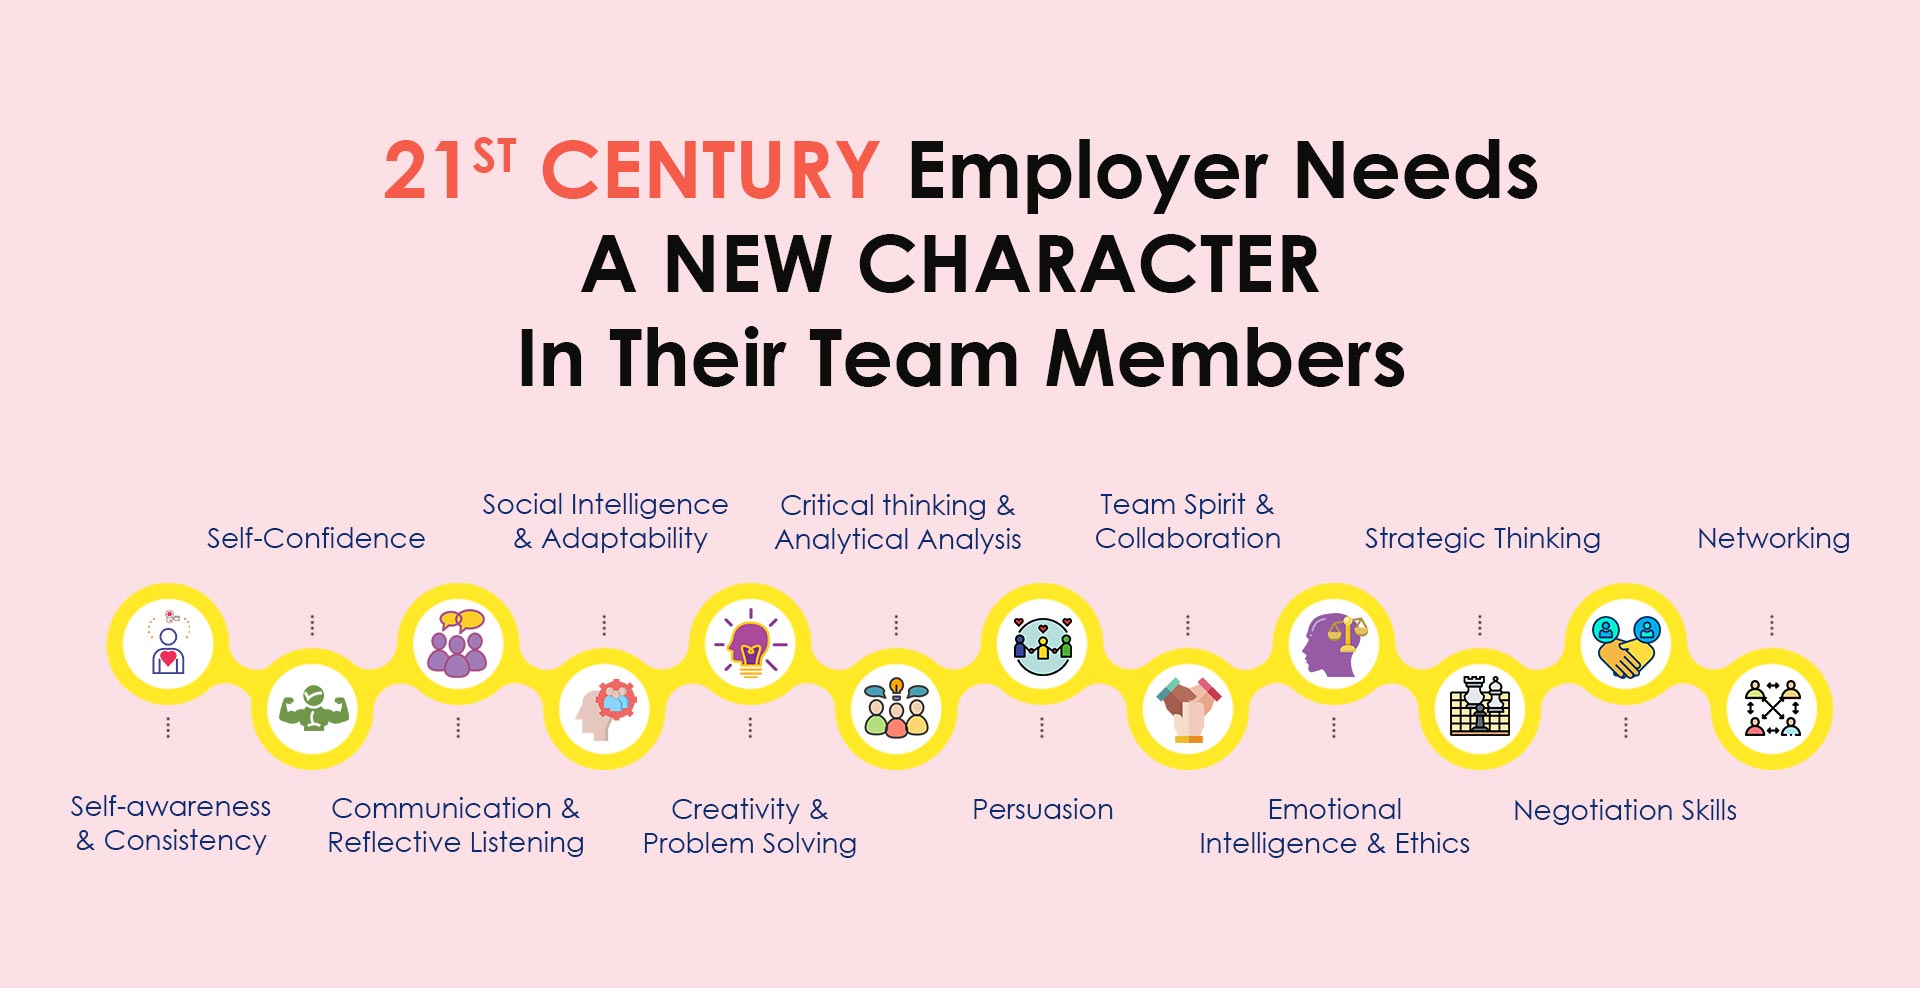 21ST CENTURY EMPLOYER NEEDS A NEW CHARACTER IN THEIR TEAM MEMBERS